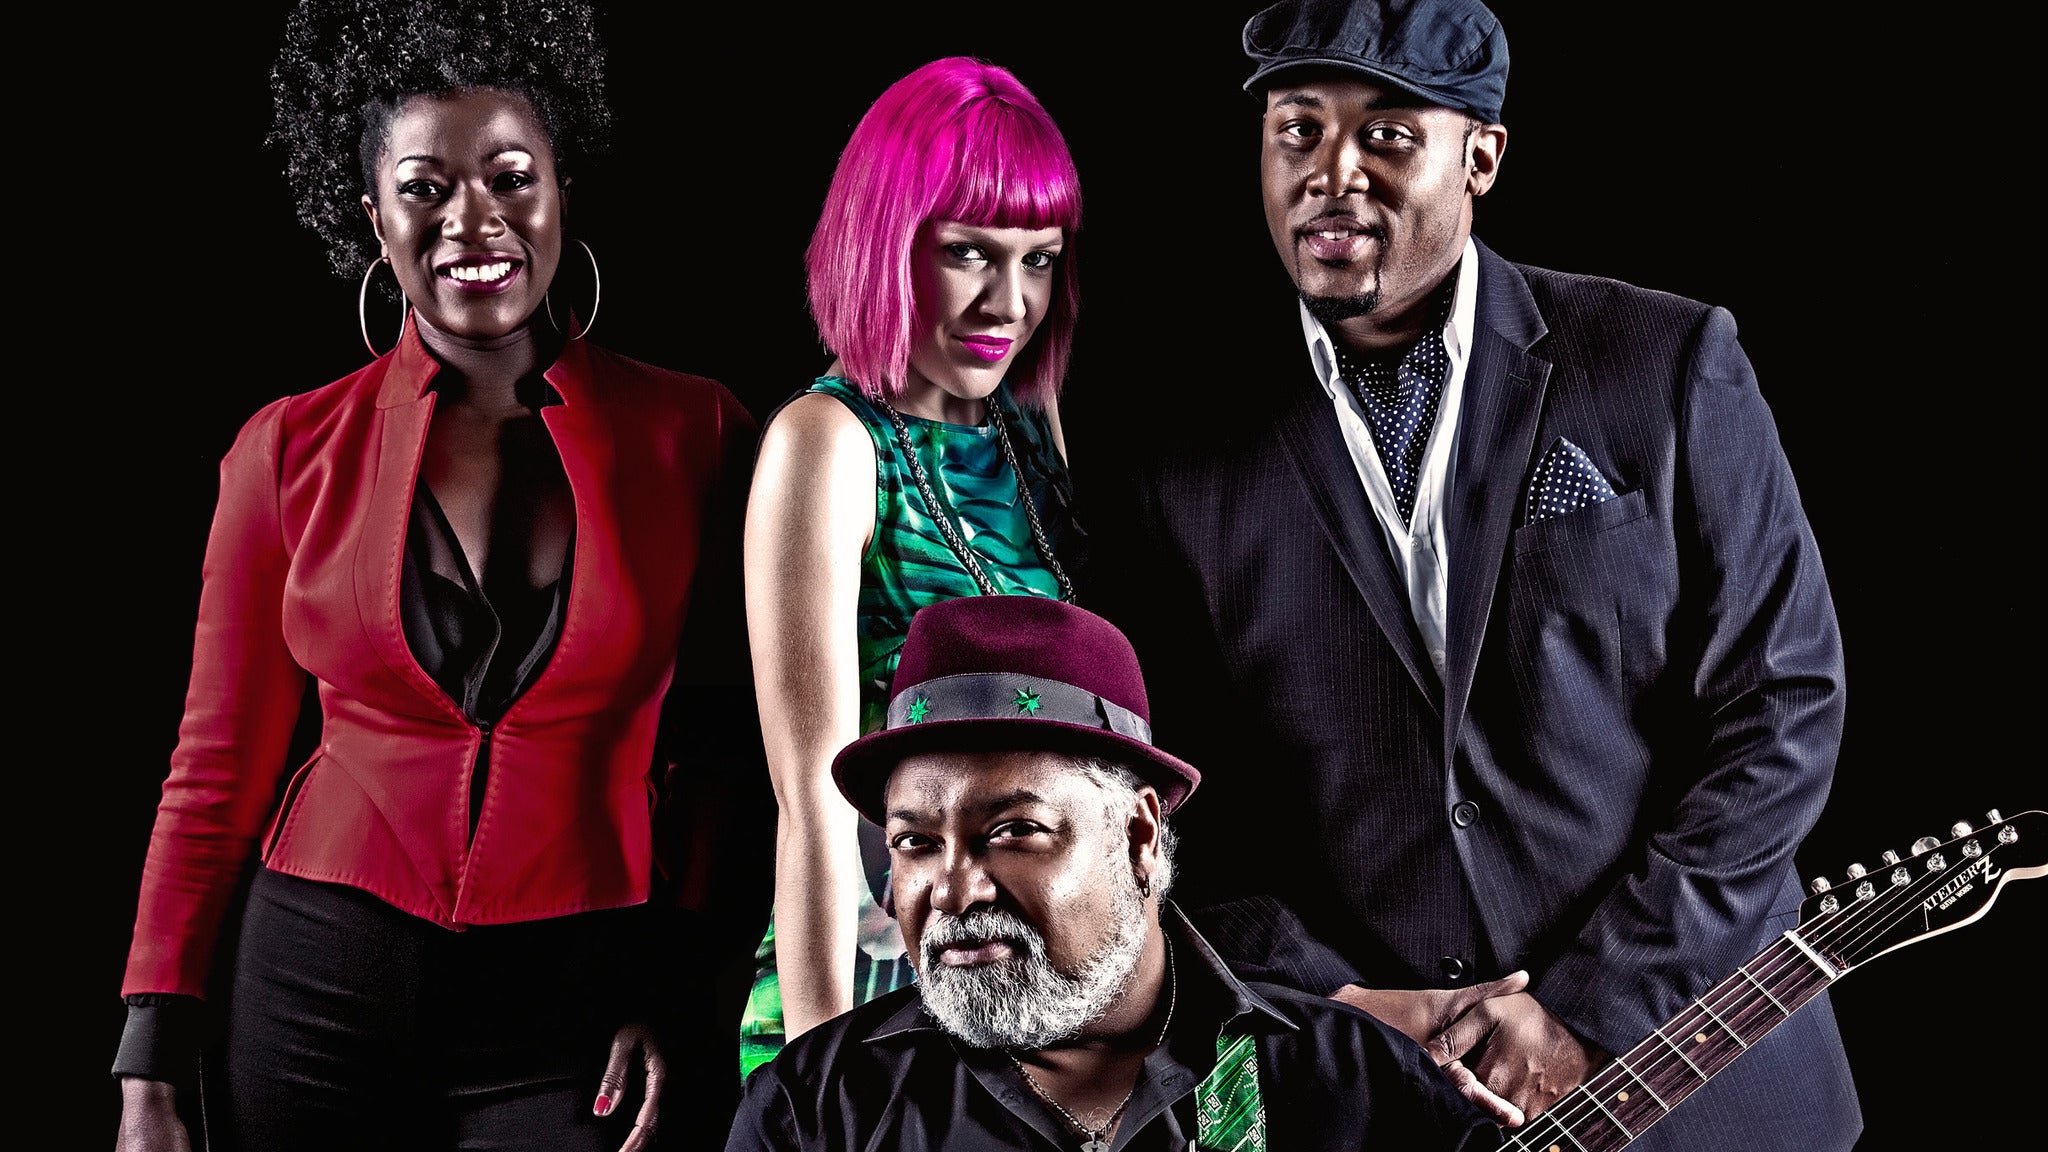 Image used with permission from Ticketmaster | Incognito tickets